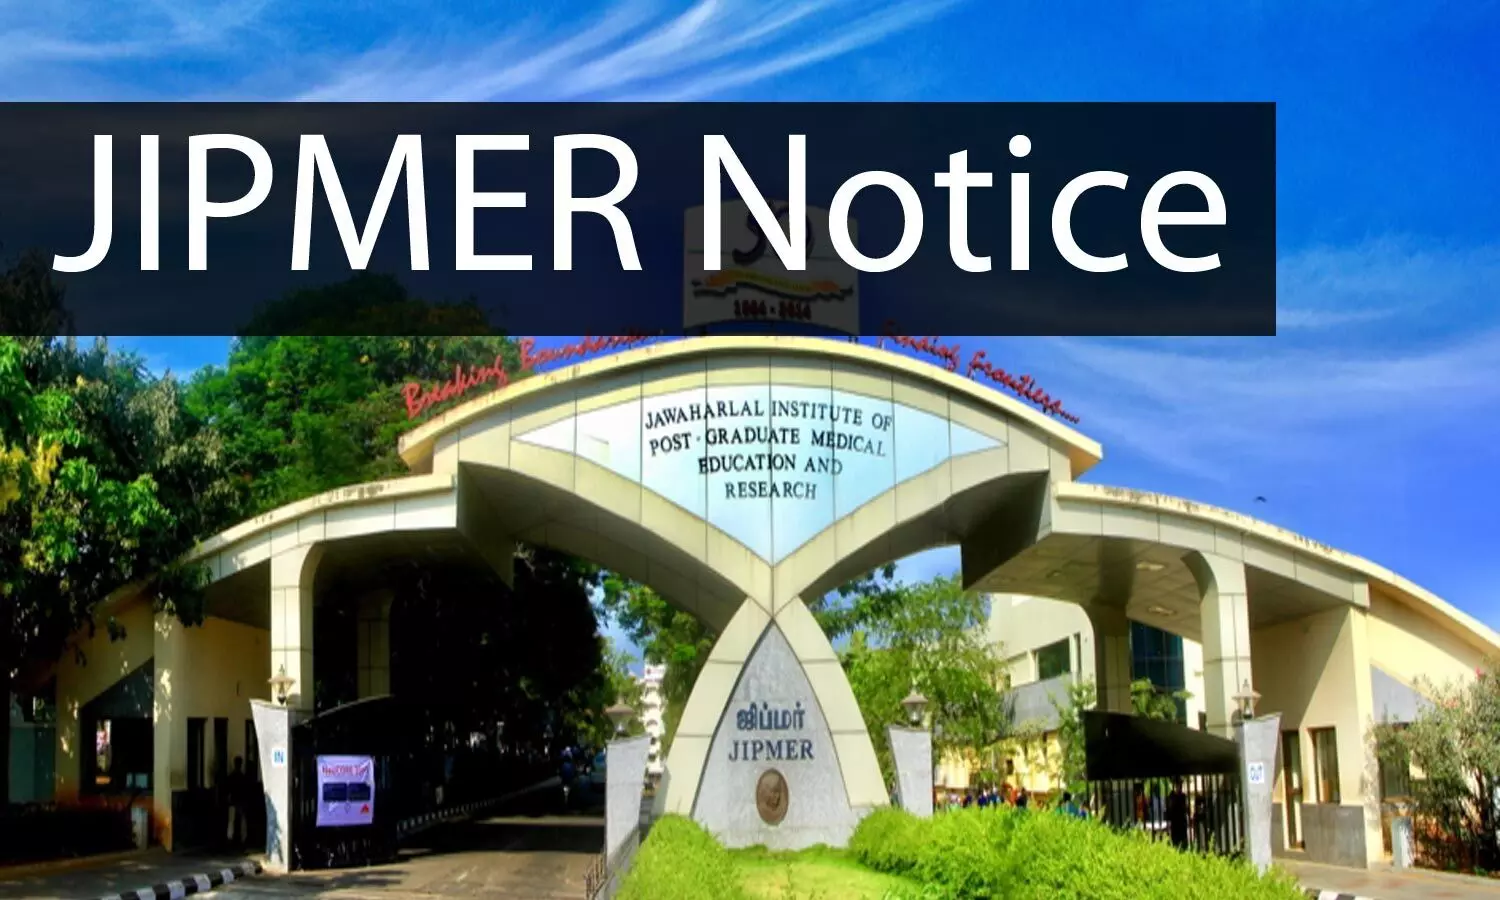 JIPMER releases July 2020 Exit Examination fee for MD, MS, DM, MCH, PDF courses